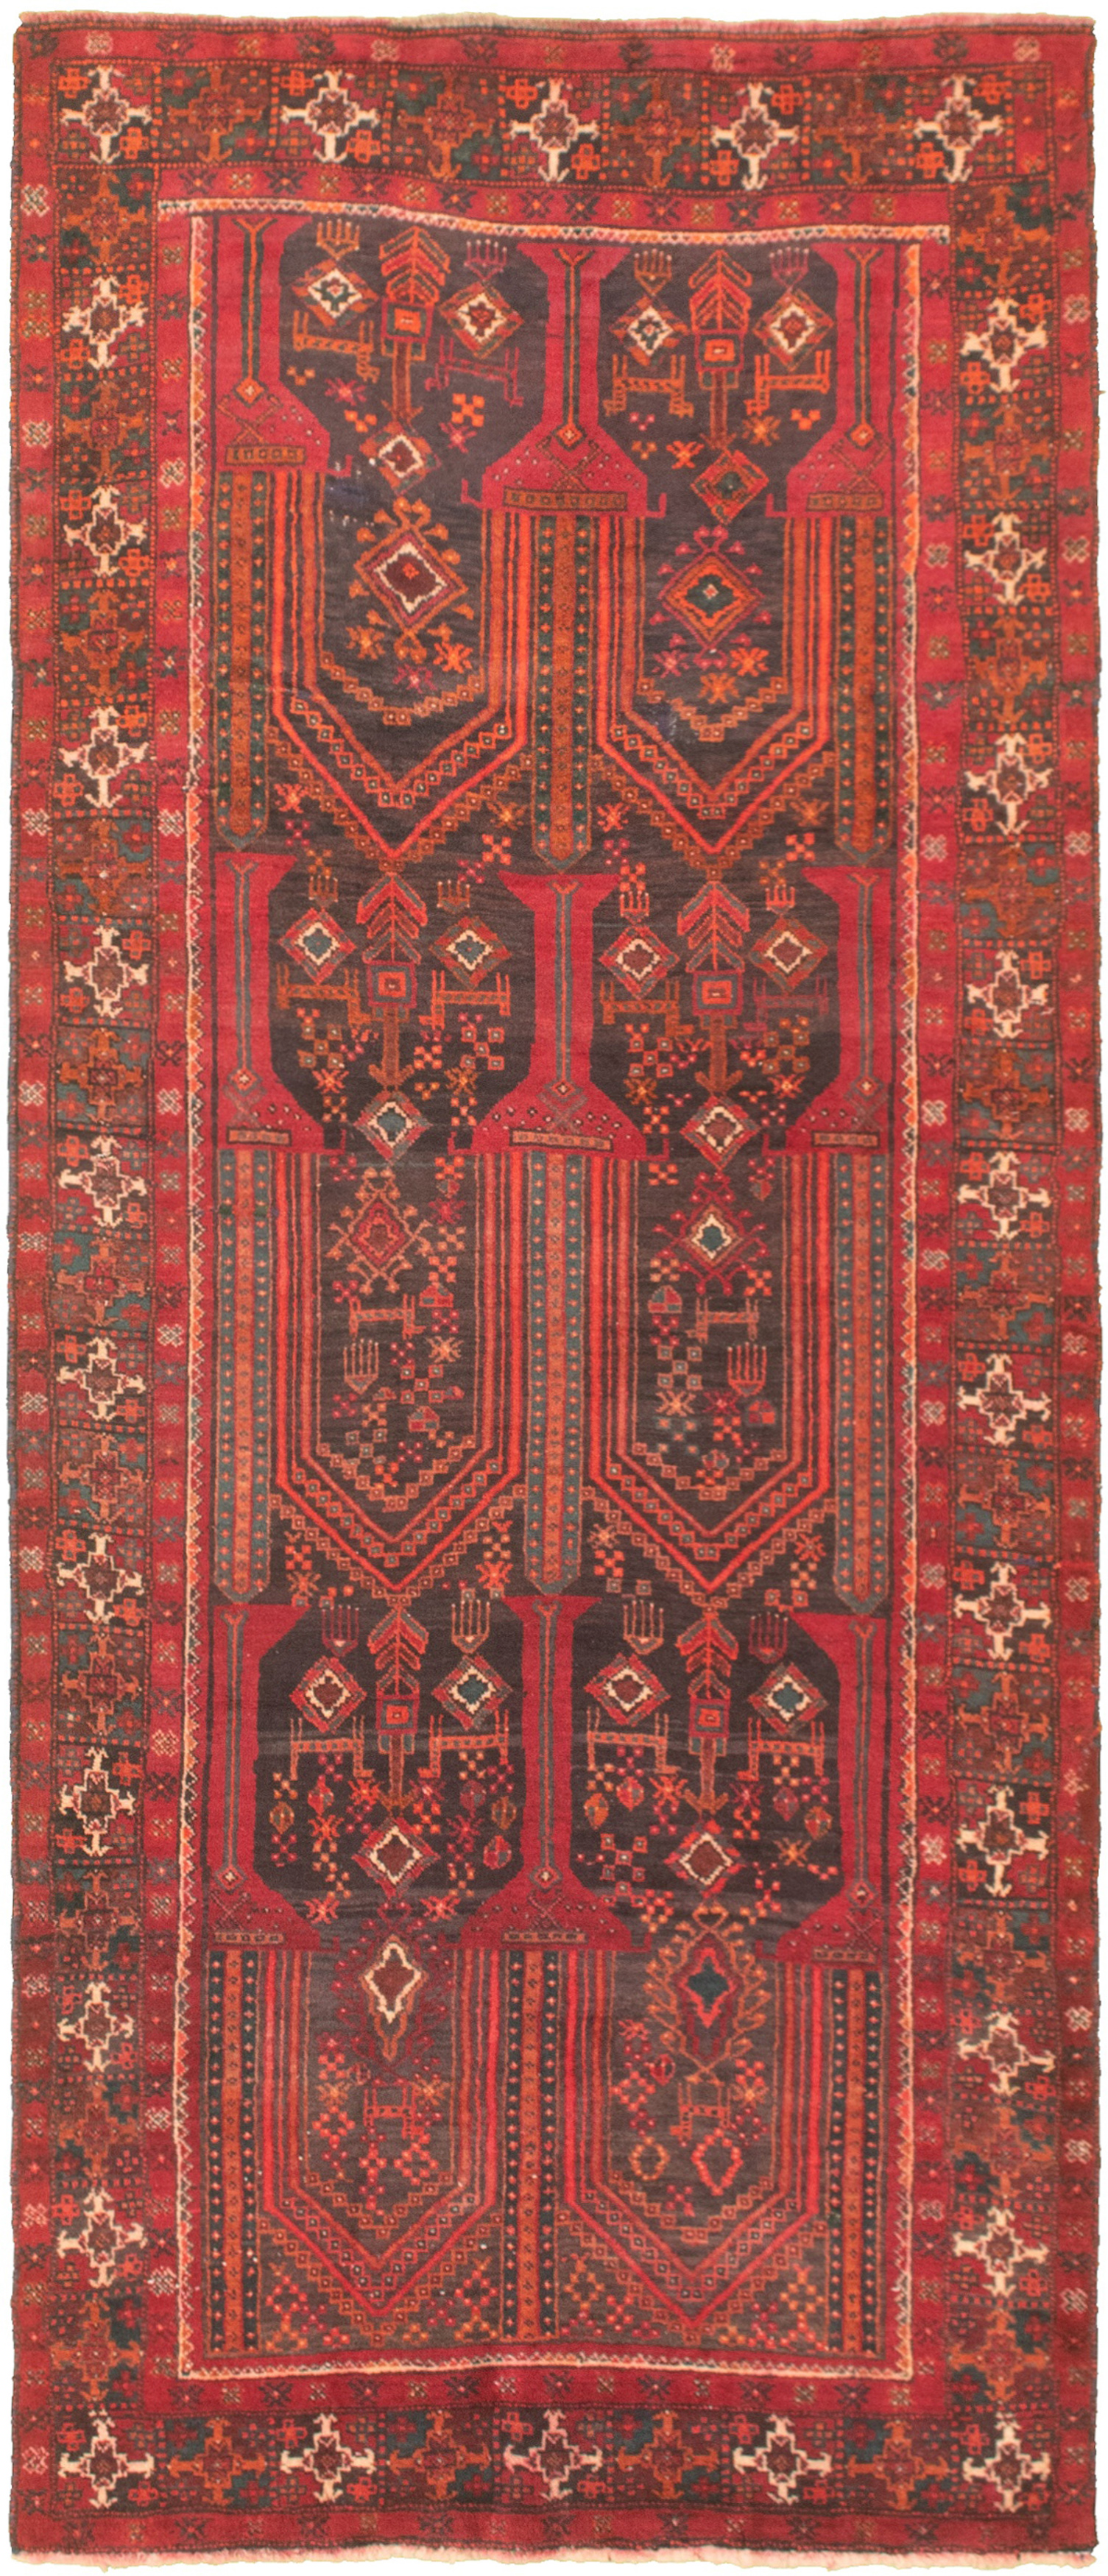 Hand-knotted Authentic Turkish Dark Red Wool Rug 3'9" x 9'2" Size: 3'9" x 9'2"  